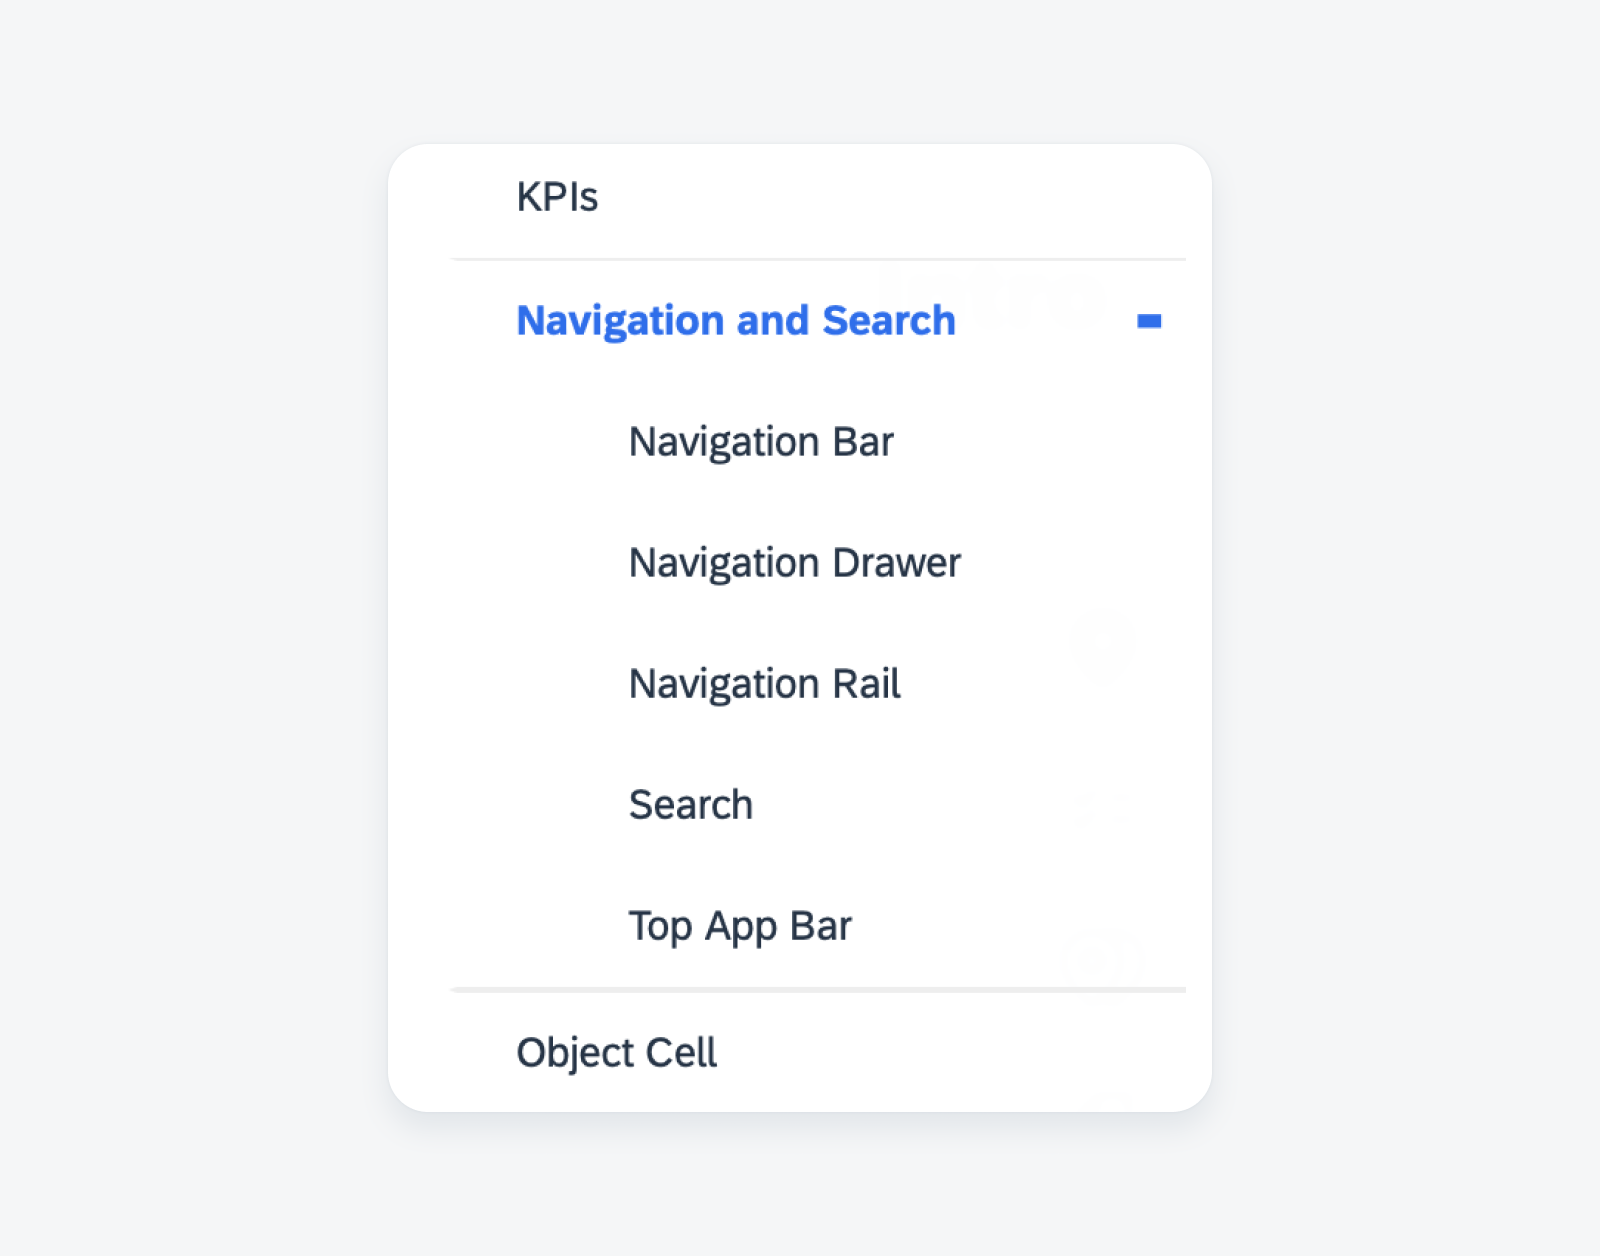 New guideline structure for Navigation and Search